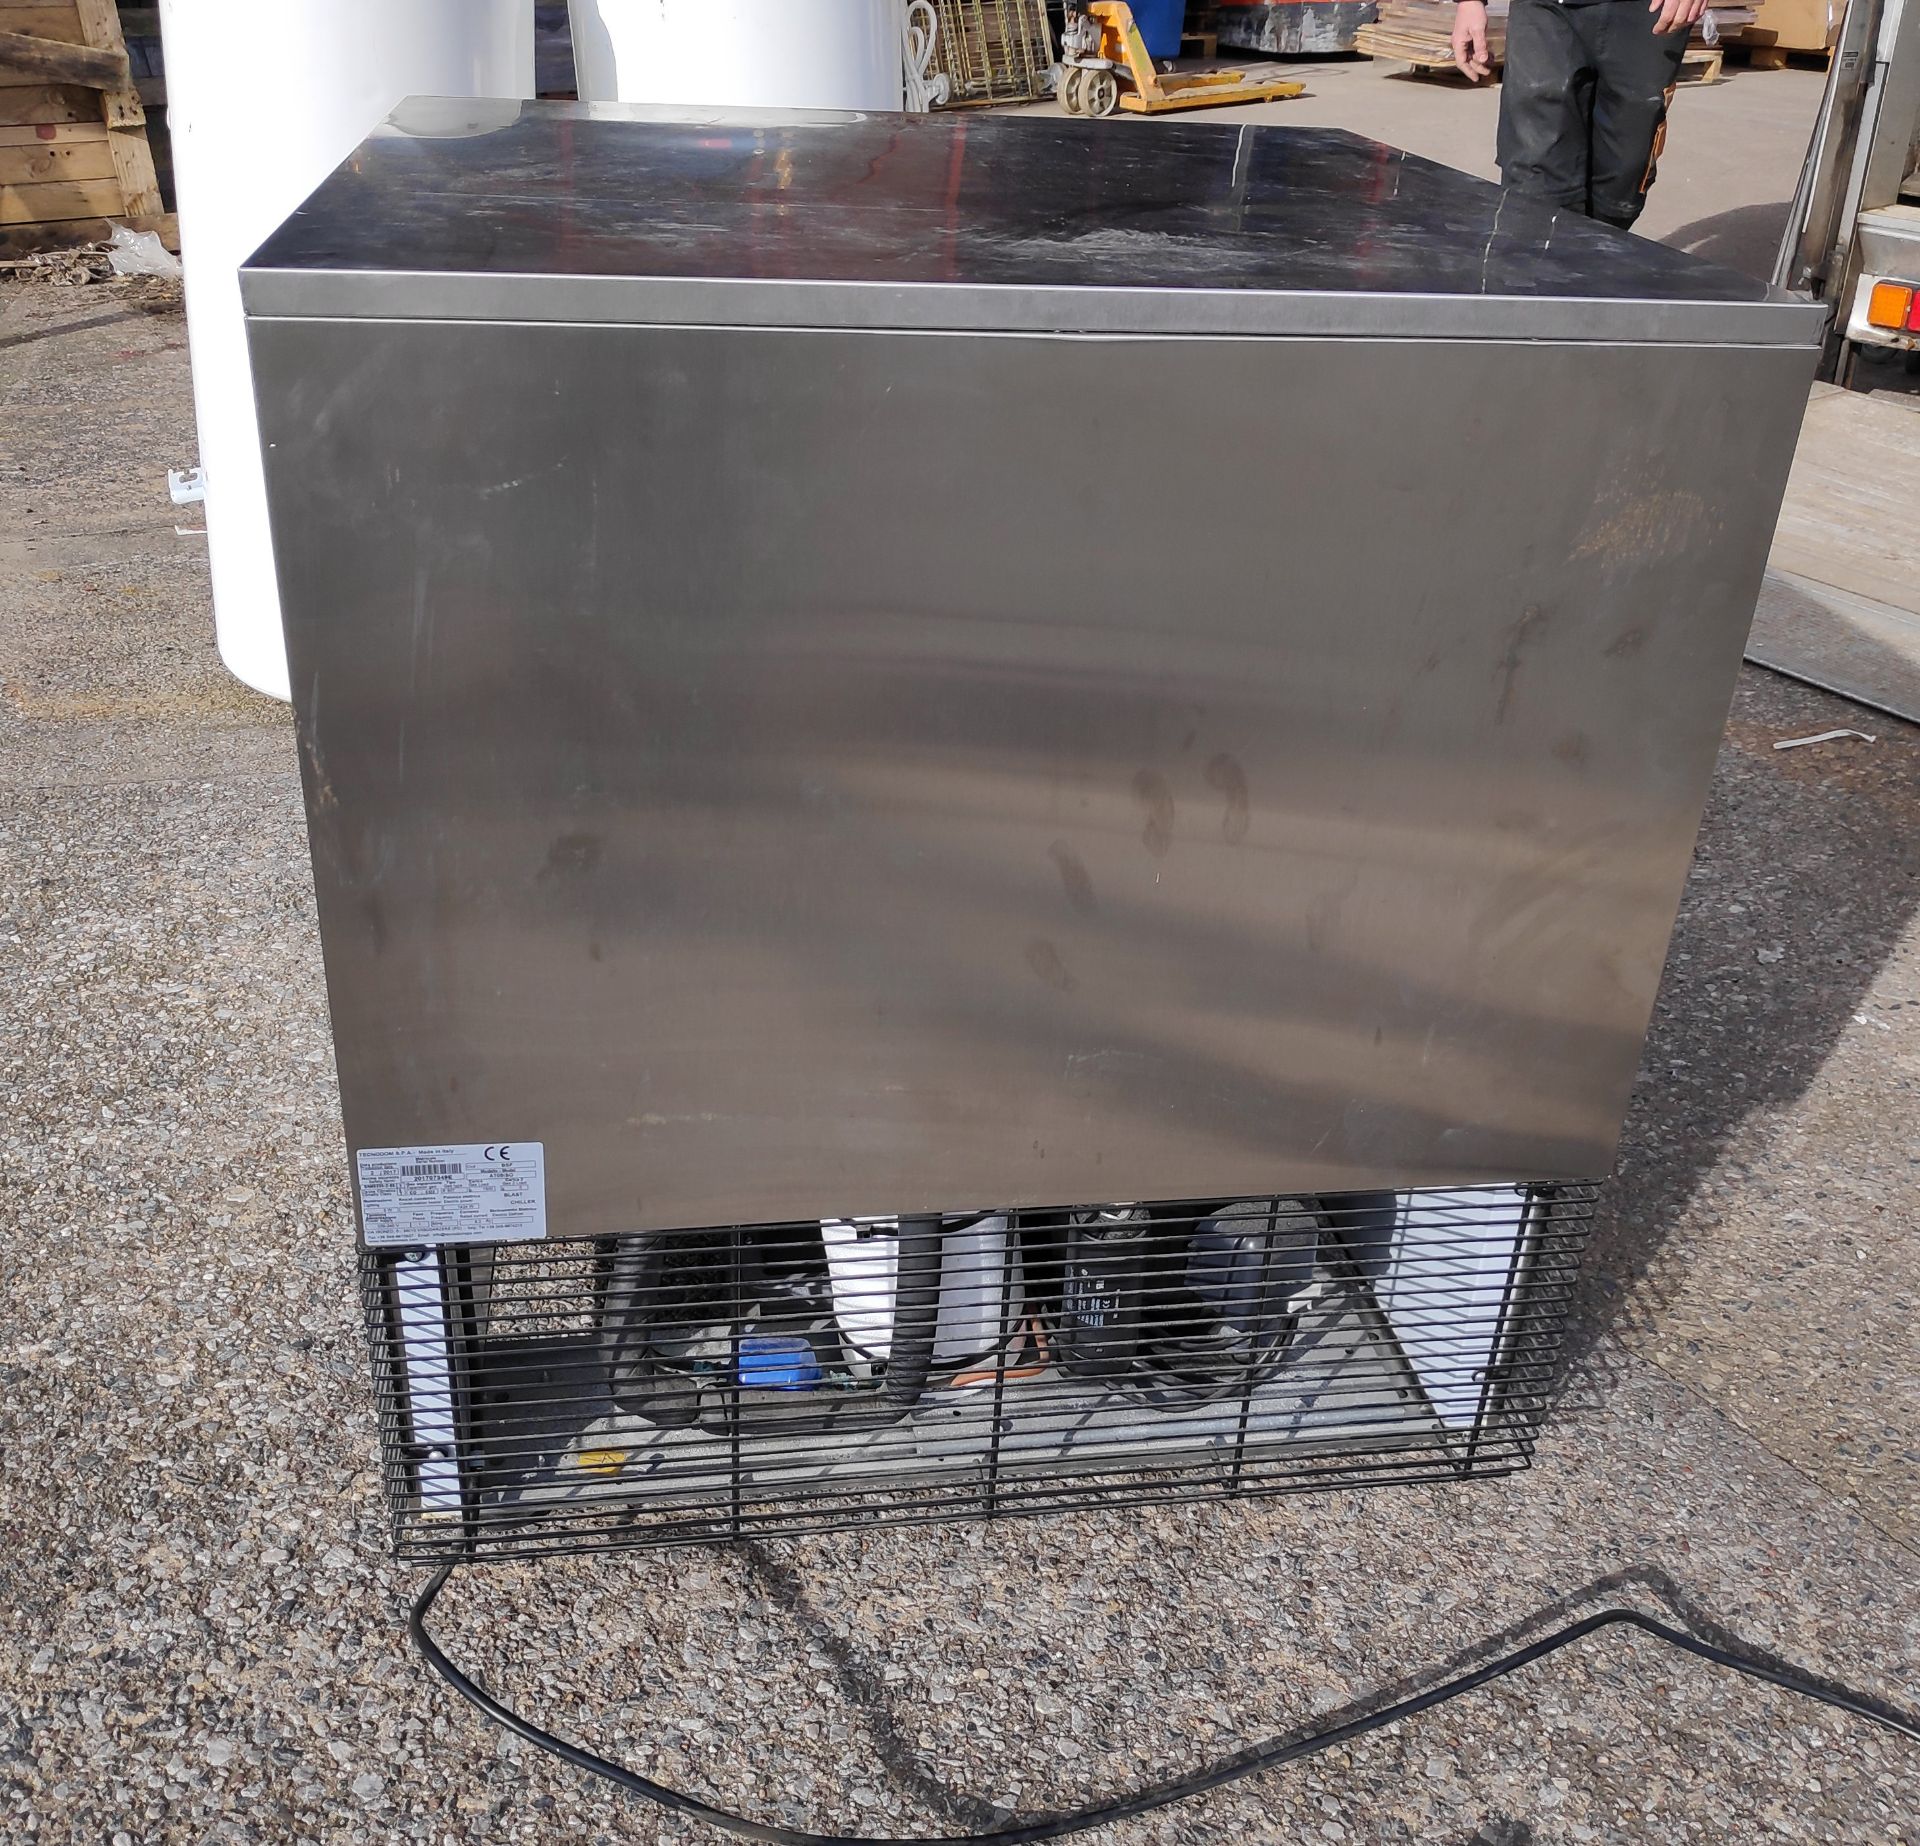 1 x DGD Undercounter Blast Chiller / Freezer - Model: AT05ISO - JMCS100 - CL723- Location: - Image 6 of 17